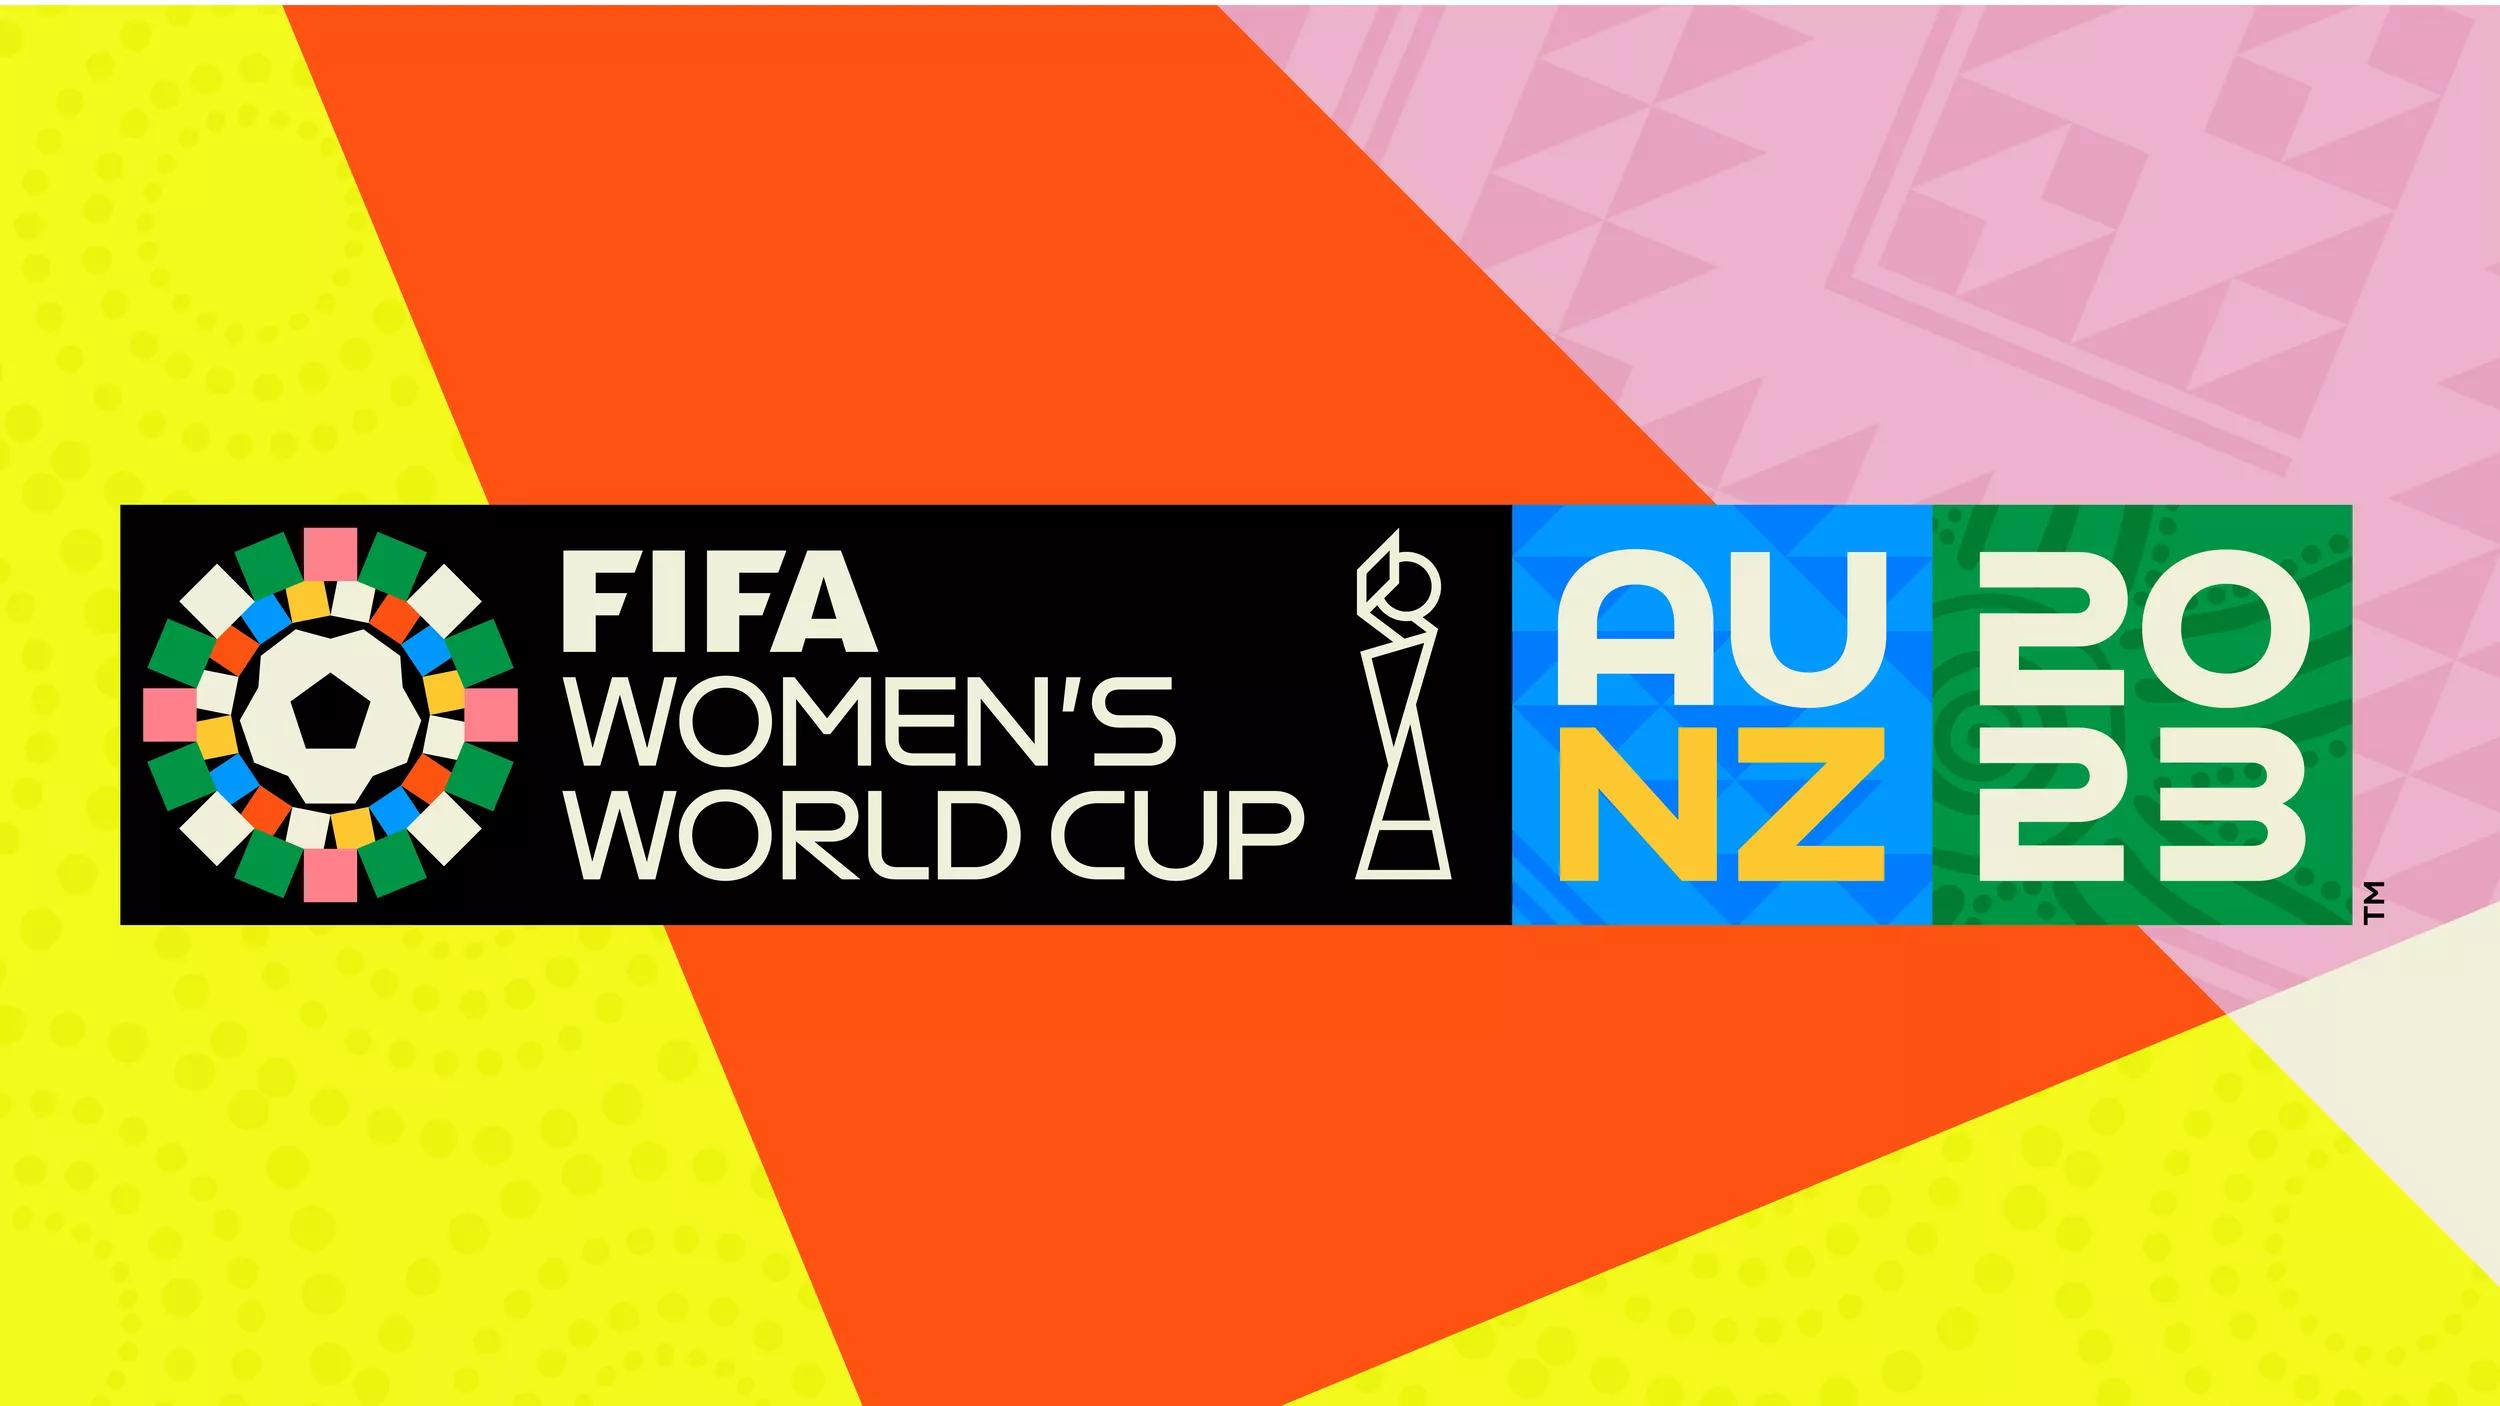 The schedule for the FIFA Women’s World Cup 2023™ has been introduced